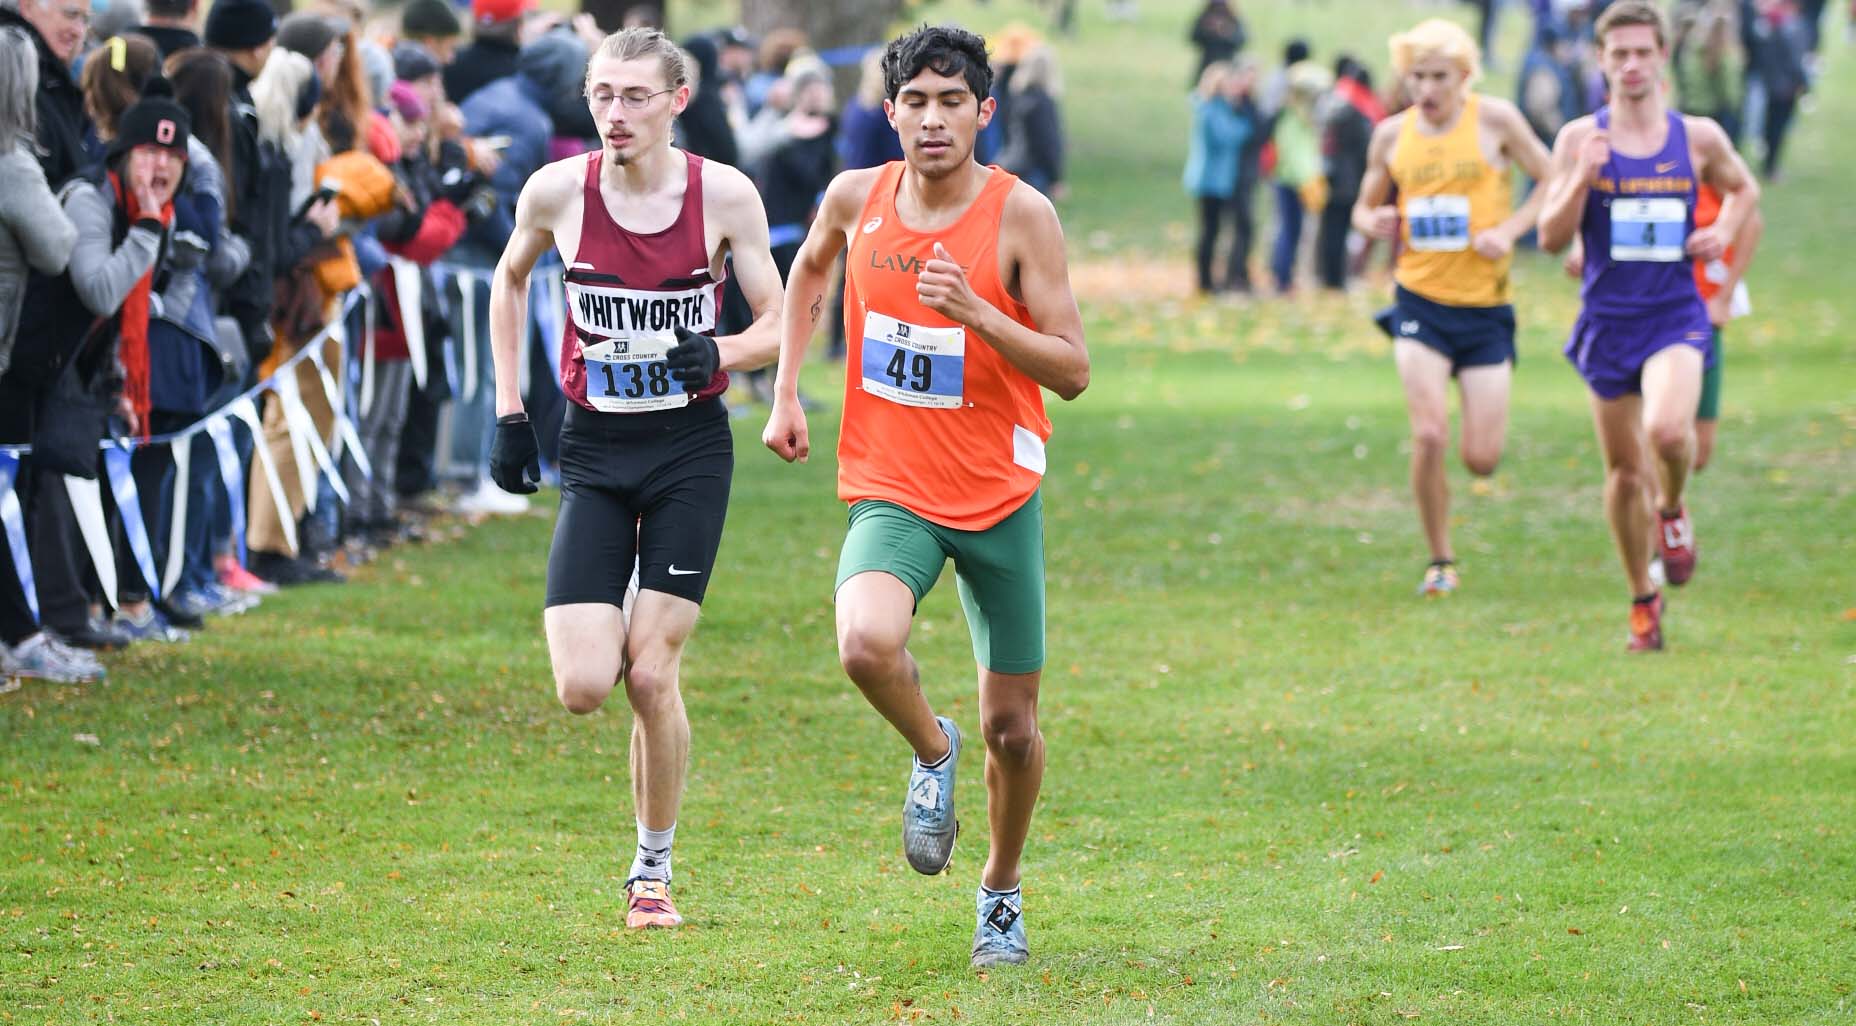 MXC has strong finish at NCAA West Regionals